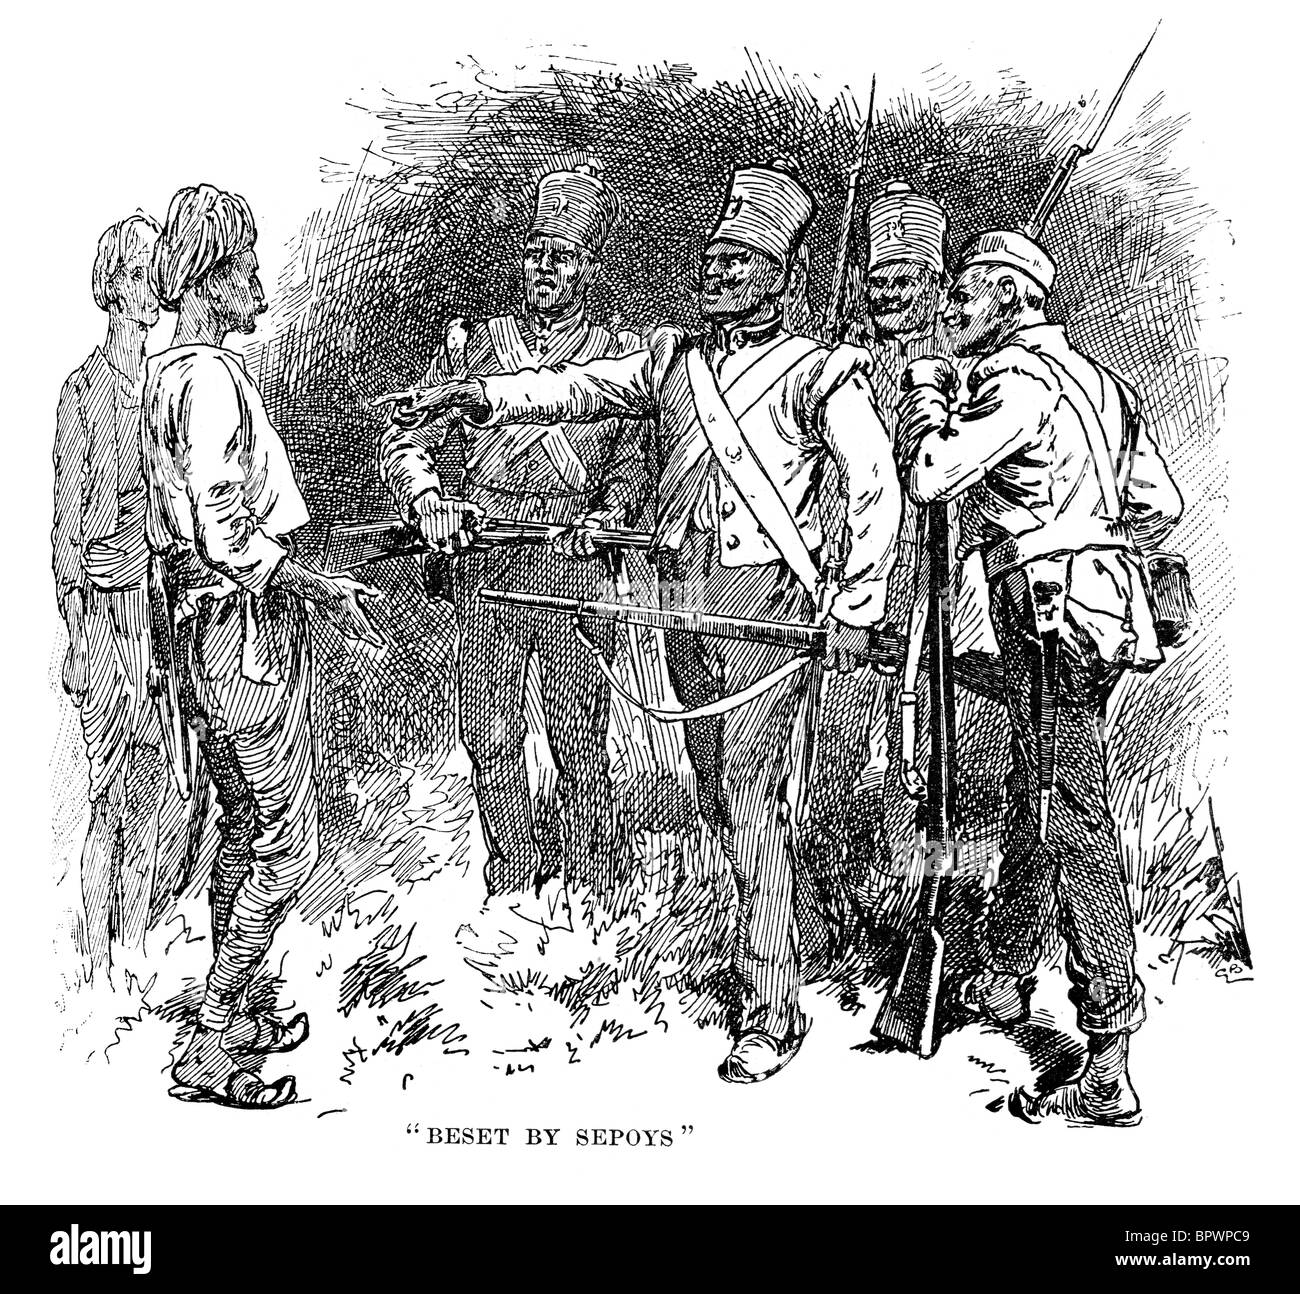 Thomas Henry Kavanagh VC disguised as an native is confronted by rebel sepoys during the Indian Mutiny. Stock Photo